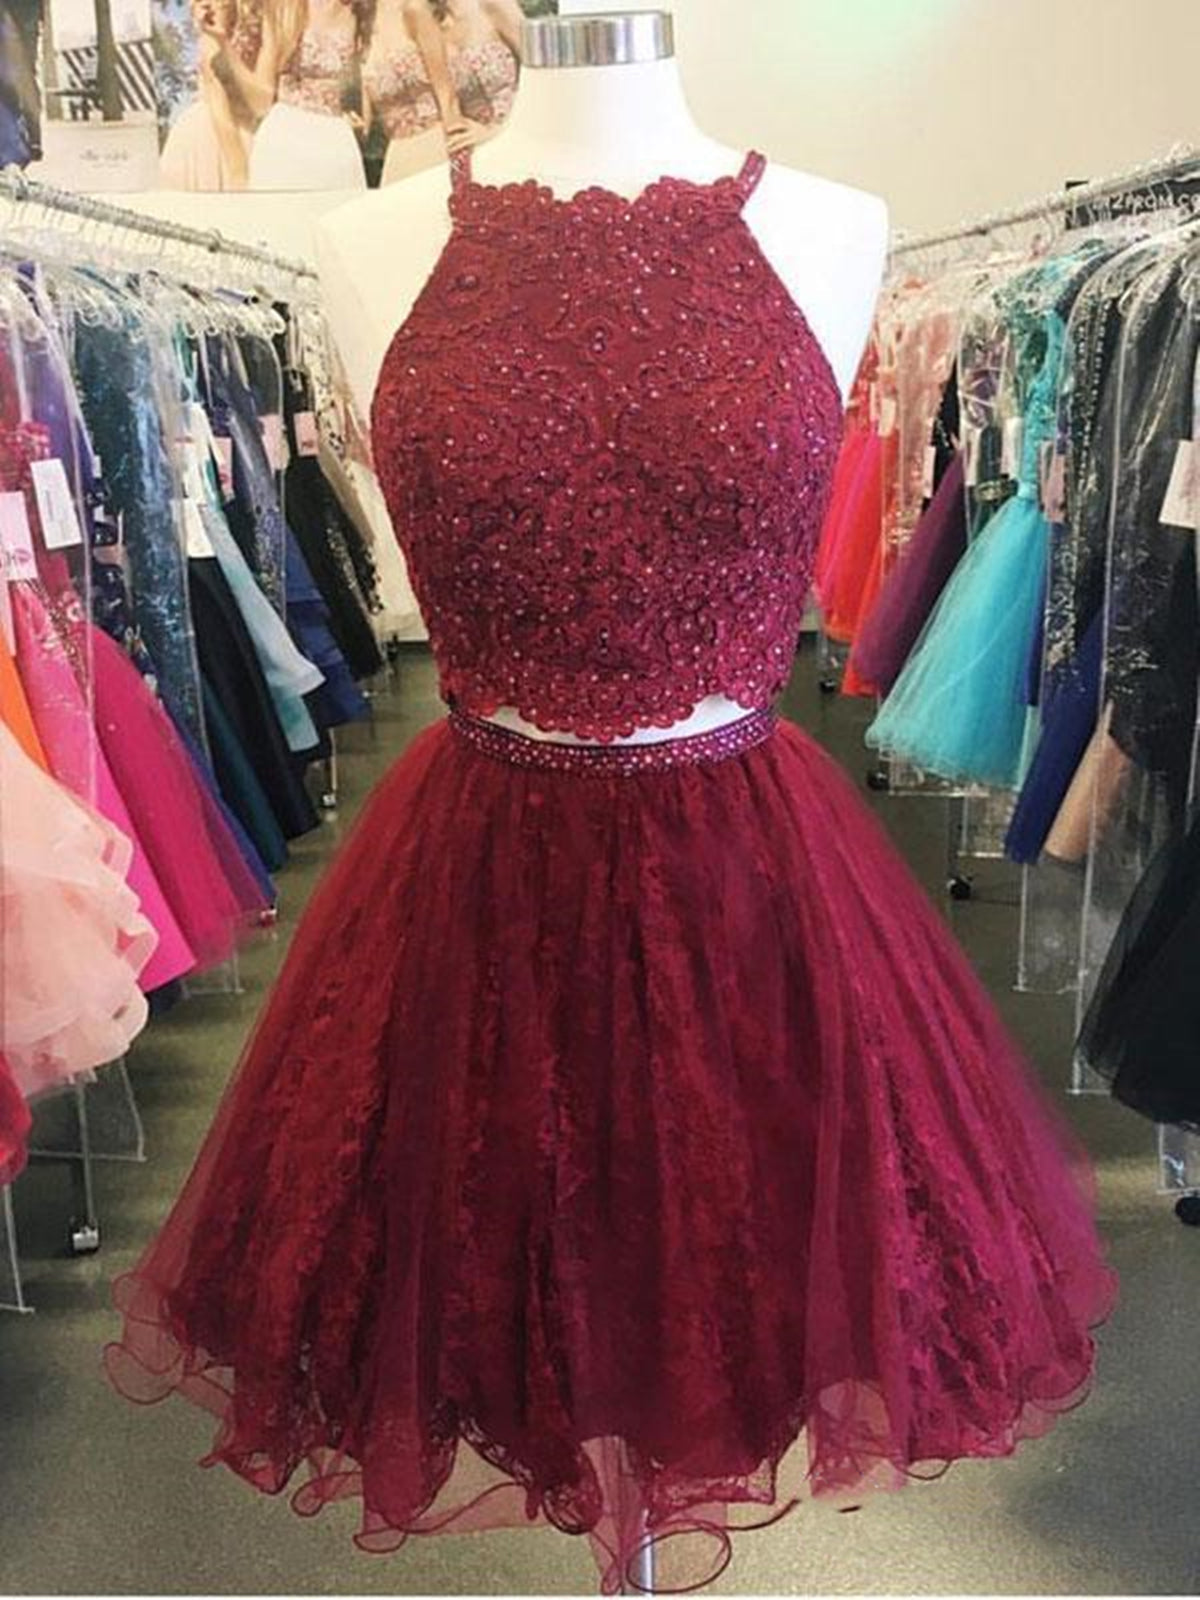 Two Pieces Short Burgundy Lace Prom Dresses For Black girls For Women, Wine Red 2 Pieces Short Lace Formal Homecoming Dresses